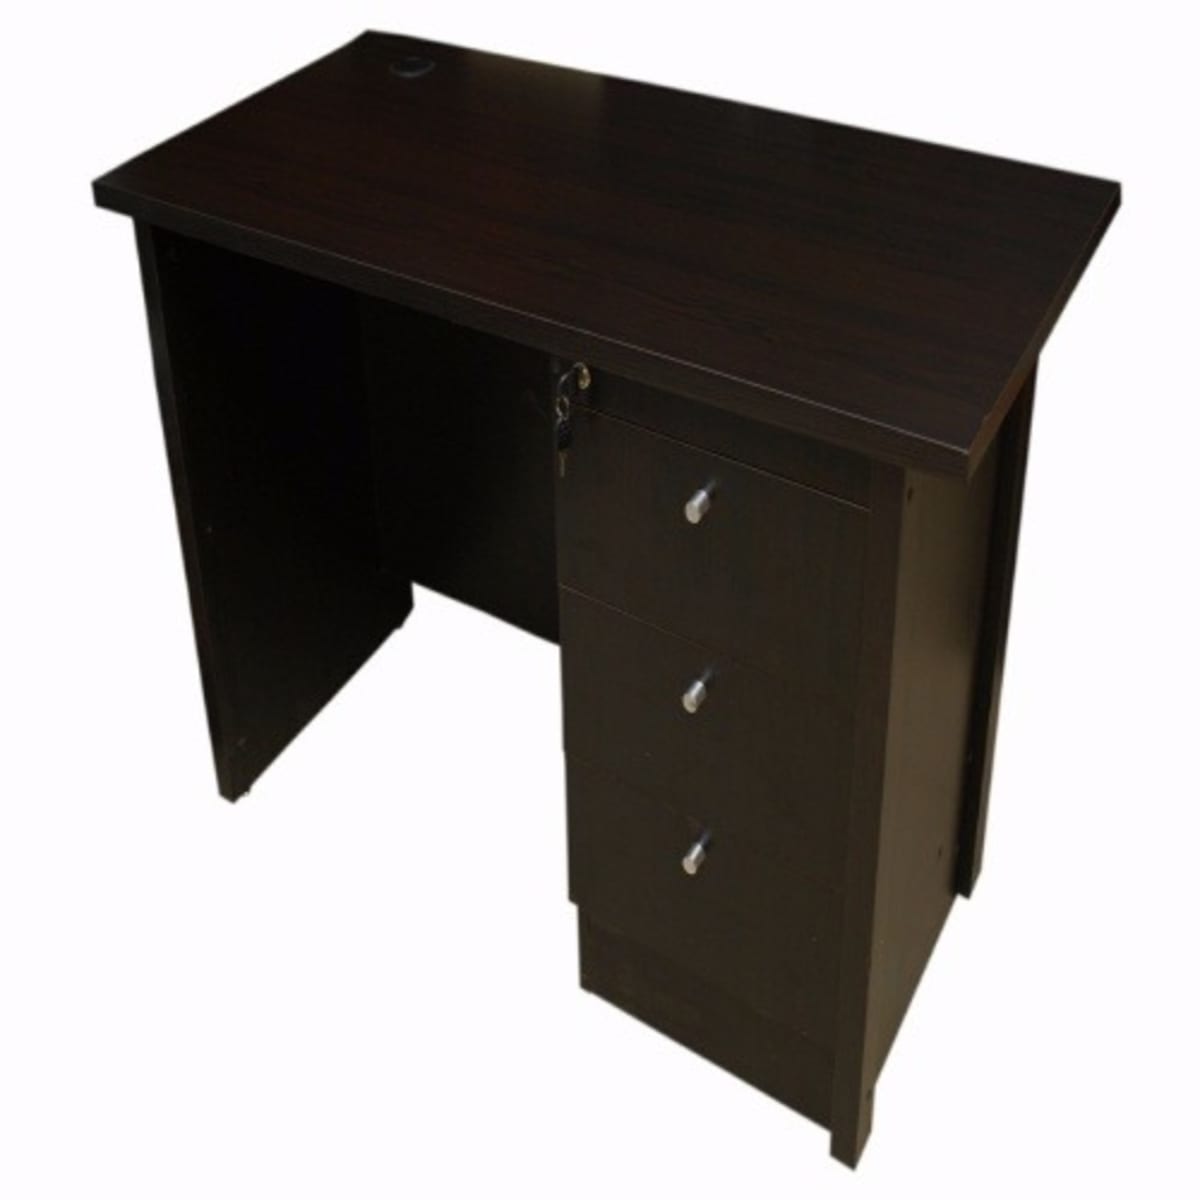 Executive Office Table - 1.2 Meters